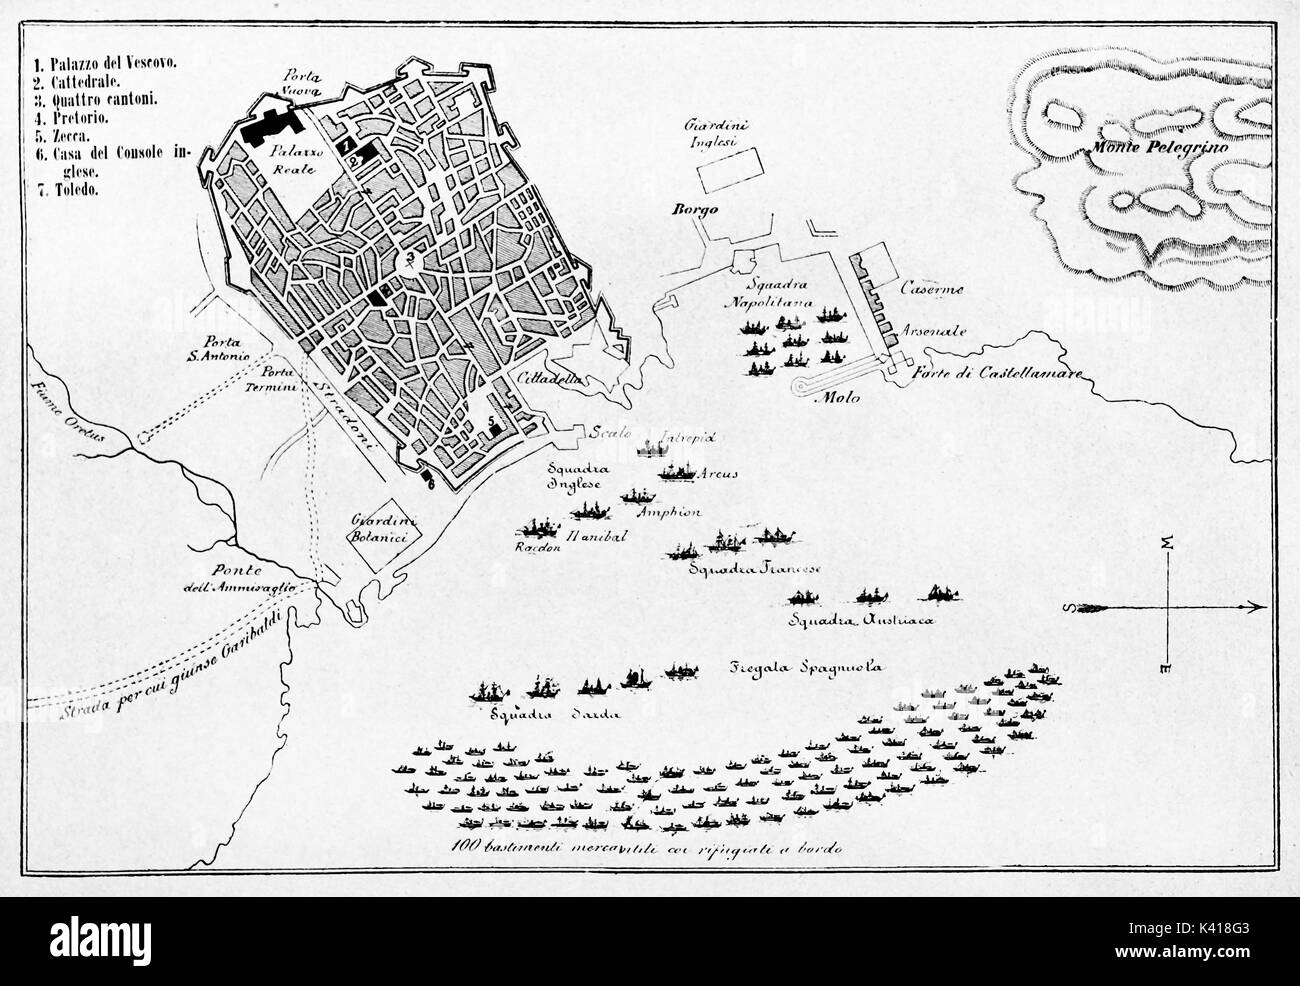 Old map of Palermo and surroundings in may 1860 with positions of the fleets in the gulf during insurrection.  By E. Matania published on Garibaldi e i Suoi Tempi Milan Italy 1884 Palermo insurrection map Stock Photo